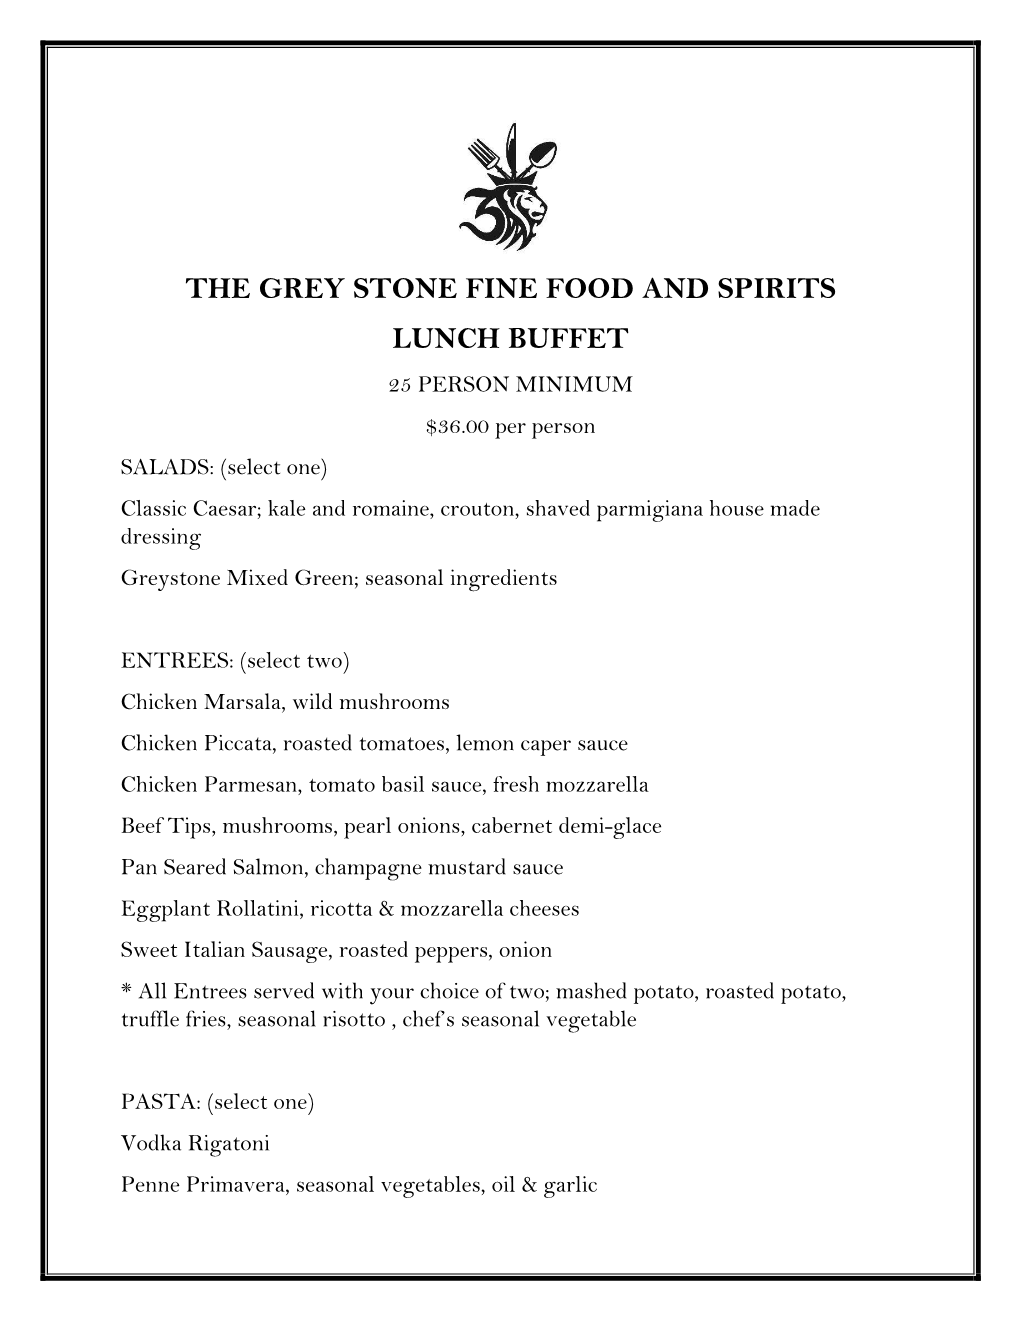 The Grey Stone Fine Food and Spirits Lunch Buffet